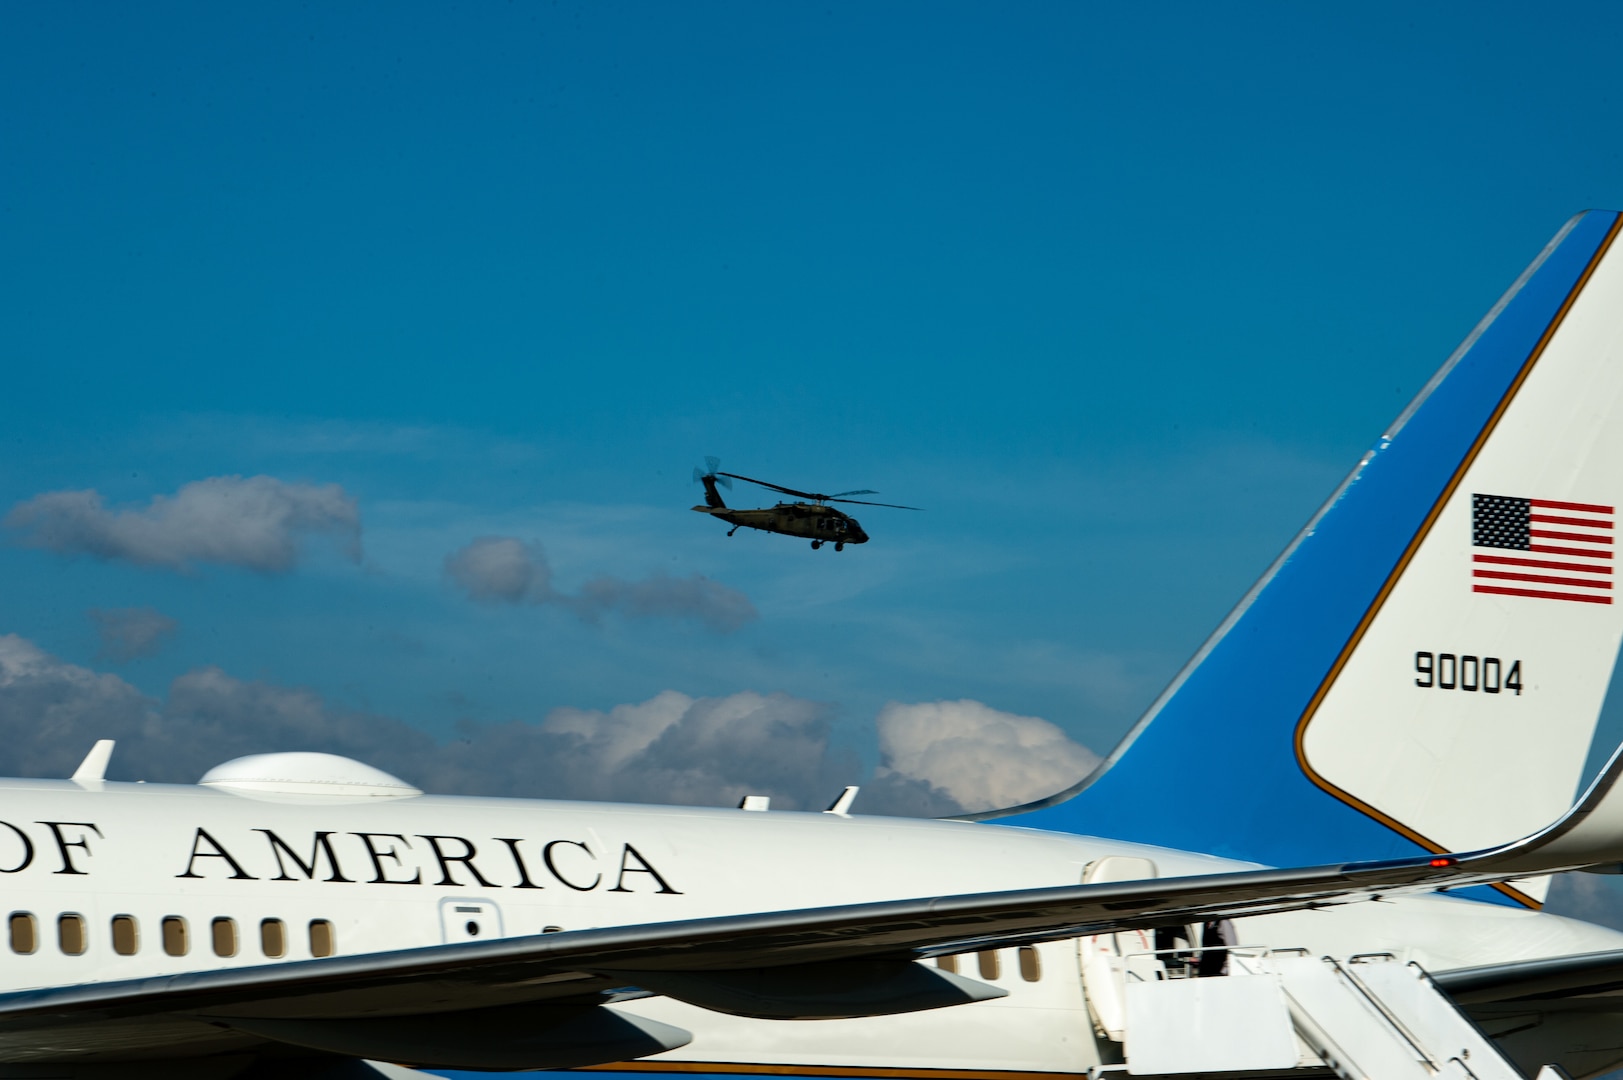 A UH-60 Blackhawk helicopter assigned to Joint Task Force Bravo’s 1st Battalion, 228th Aviation Regiment flies over Air Force Two while transporting Vice President of the United States Kamala Harris at Soto Cano Air Base, Honduras, Jan. 27, 2022.